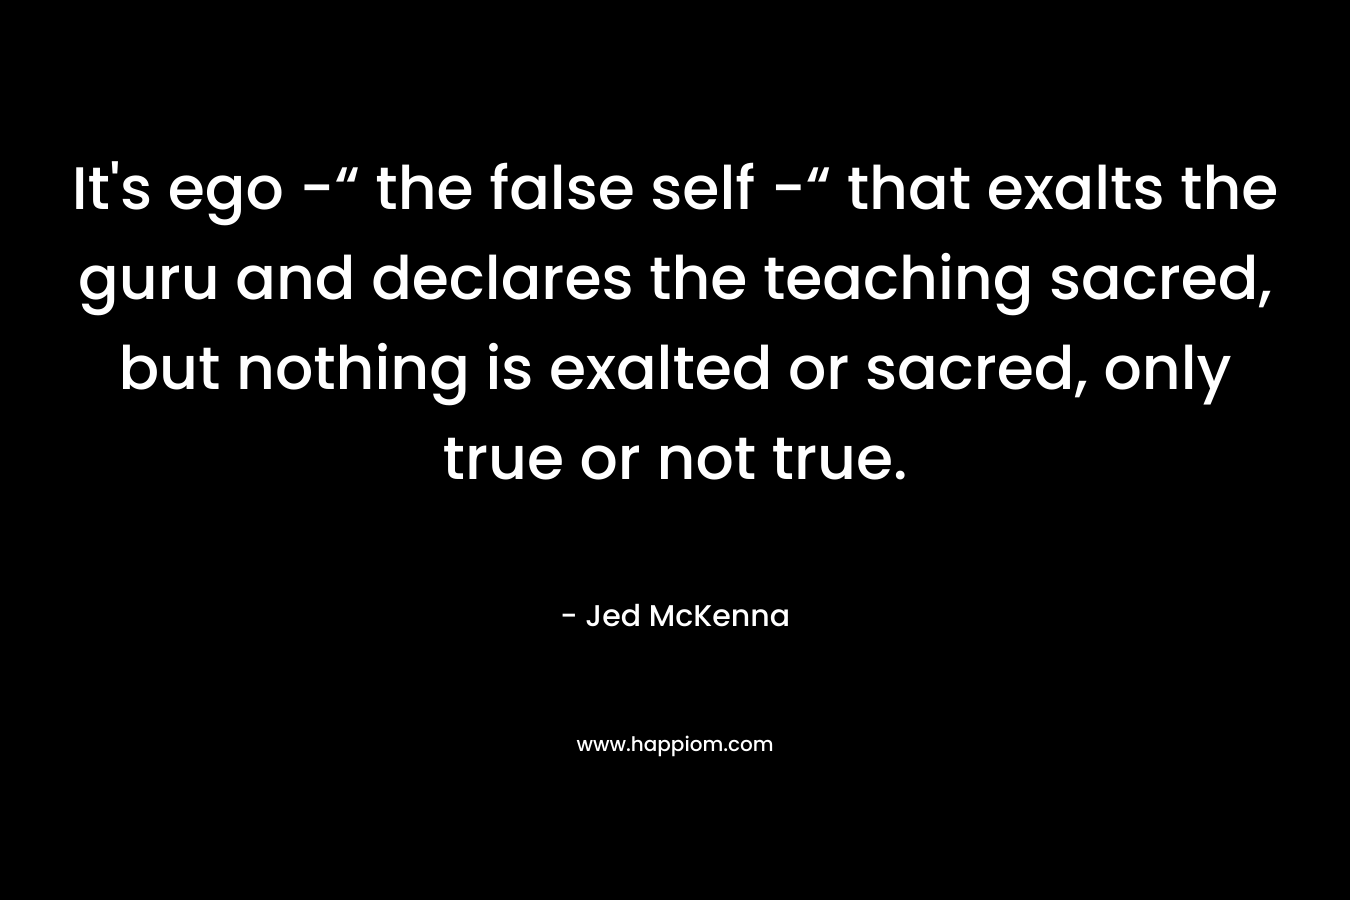 It's ego -“ the false self -“ that exalts the guru and declares the teaching sacred, but nothing is exalted or sacred, only true or not true.